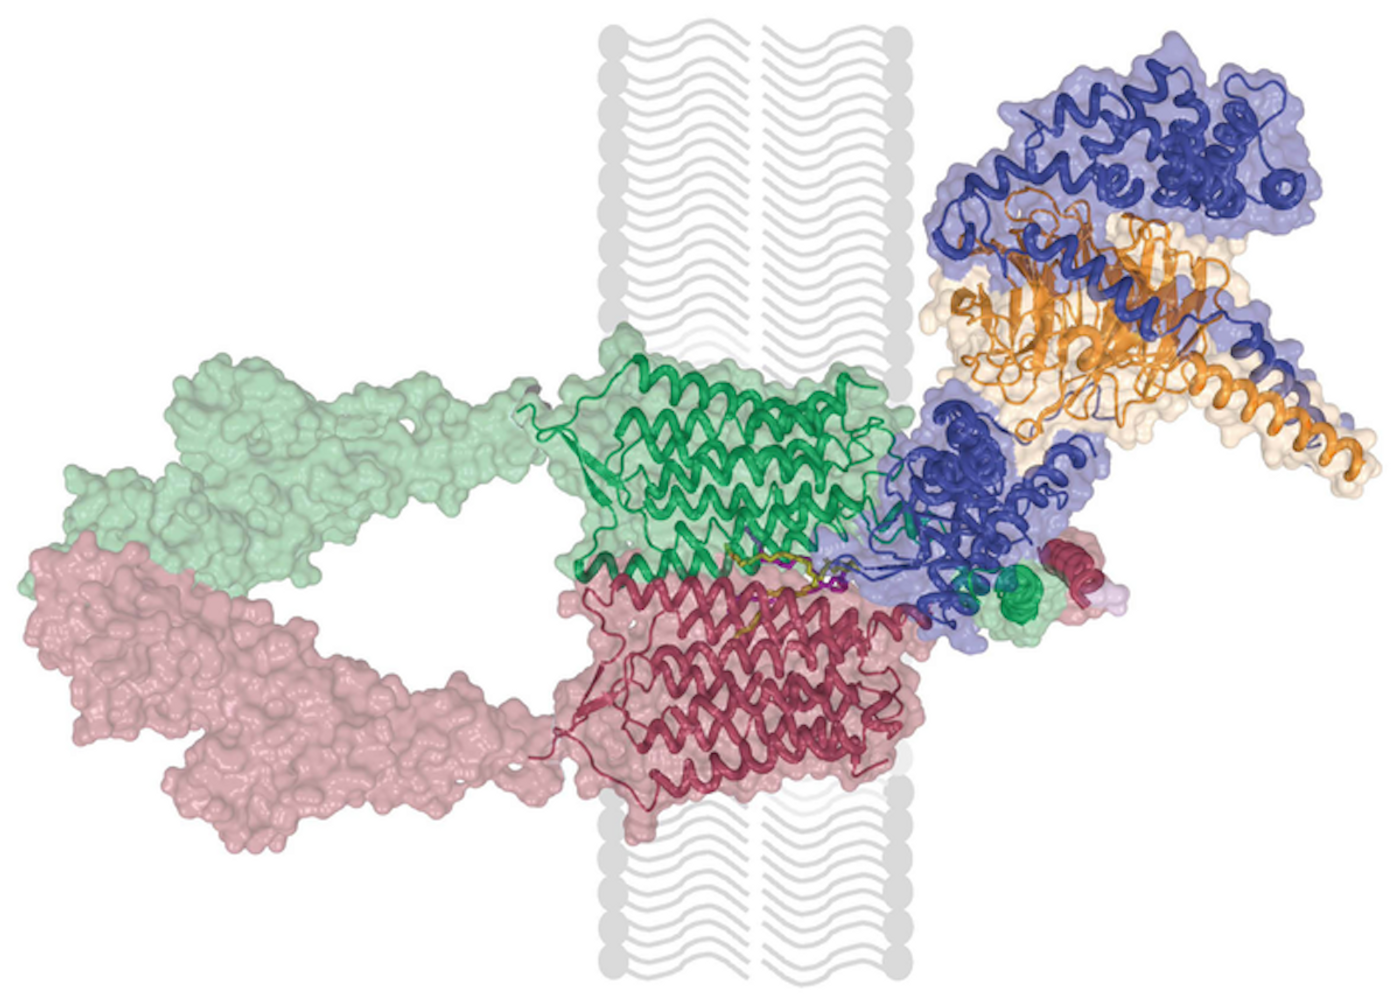 Cryo-EM cartoon rendition of a receptor linked to depression - GPR158 protomers (green and raspberry) with its signaling complex - RGS7 (blue) G5 (orange), and the lipid bilayer (gray). The assembly is called GPR158-RGS7-G5. Image courtesy of Martemyanov lab, Scripps Research Florida.